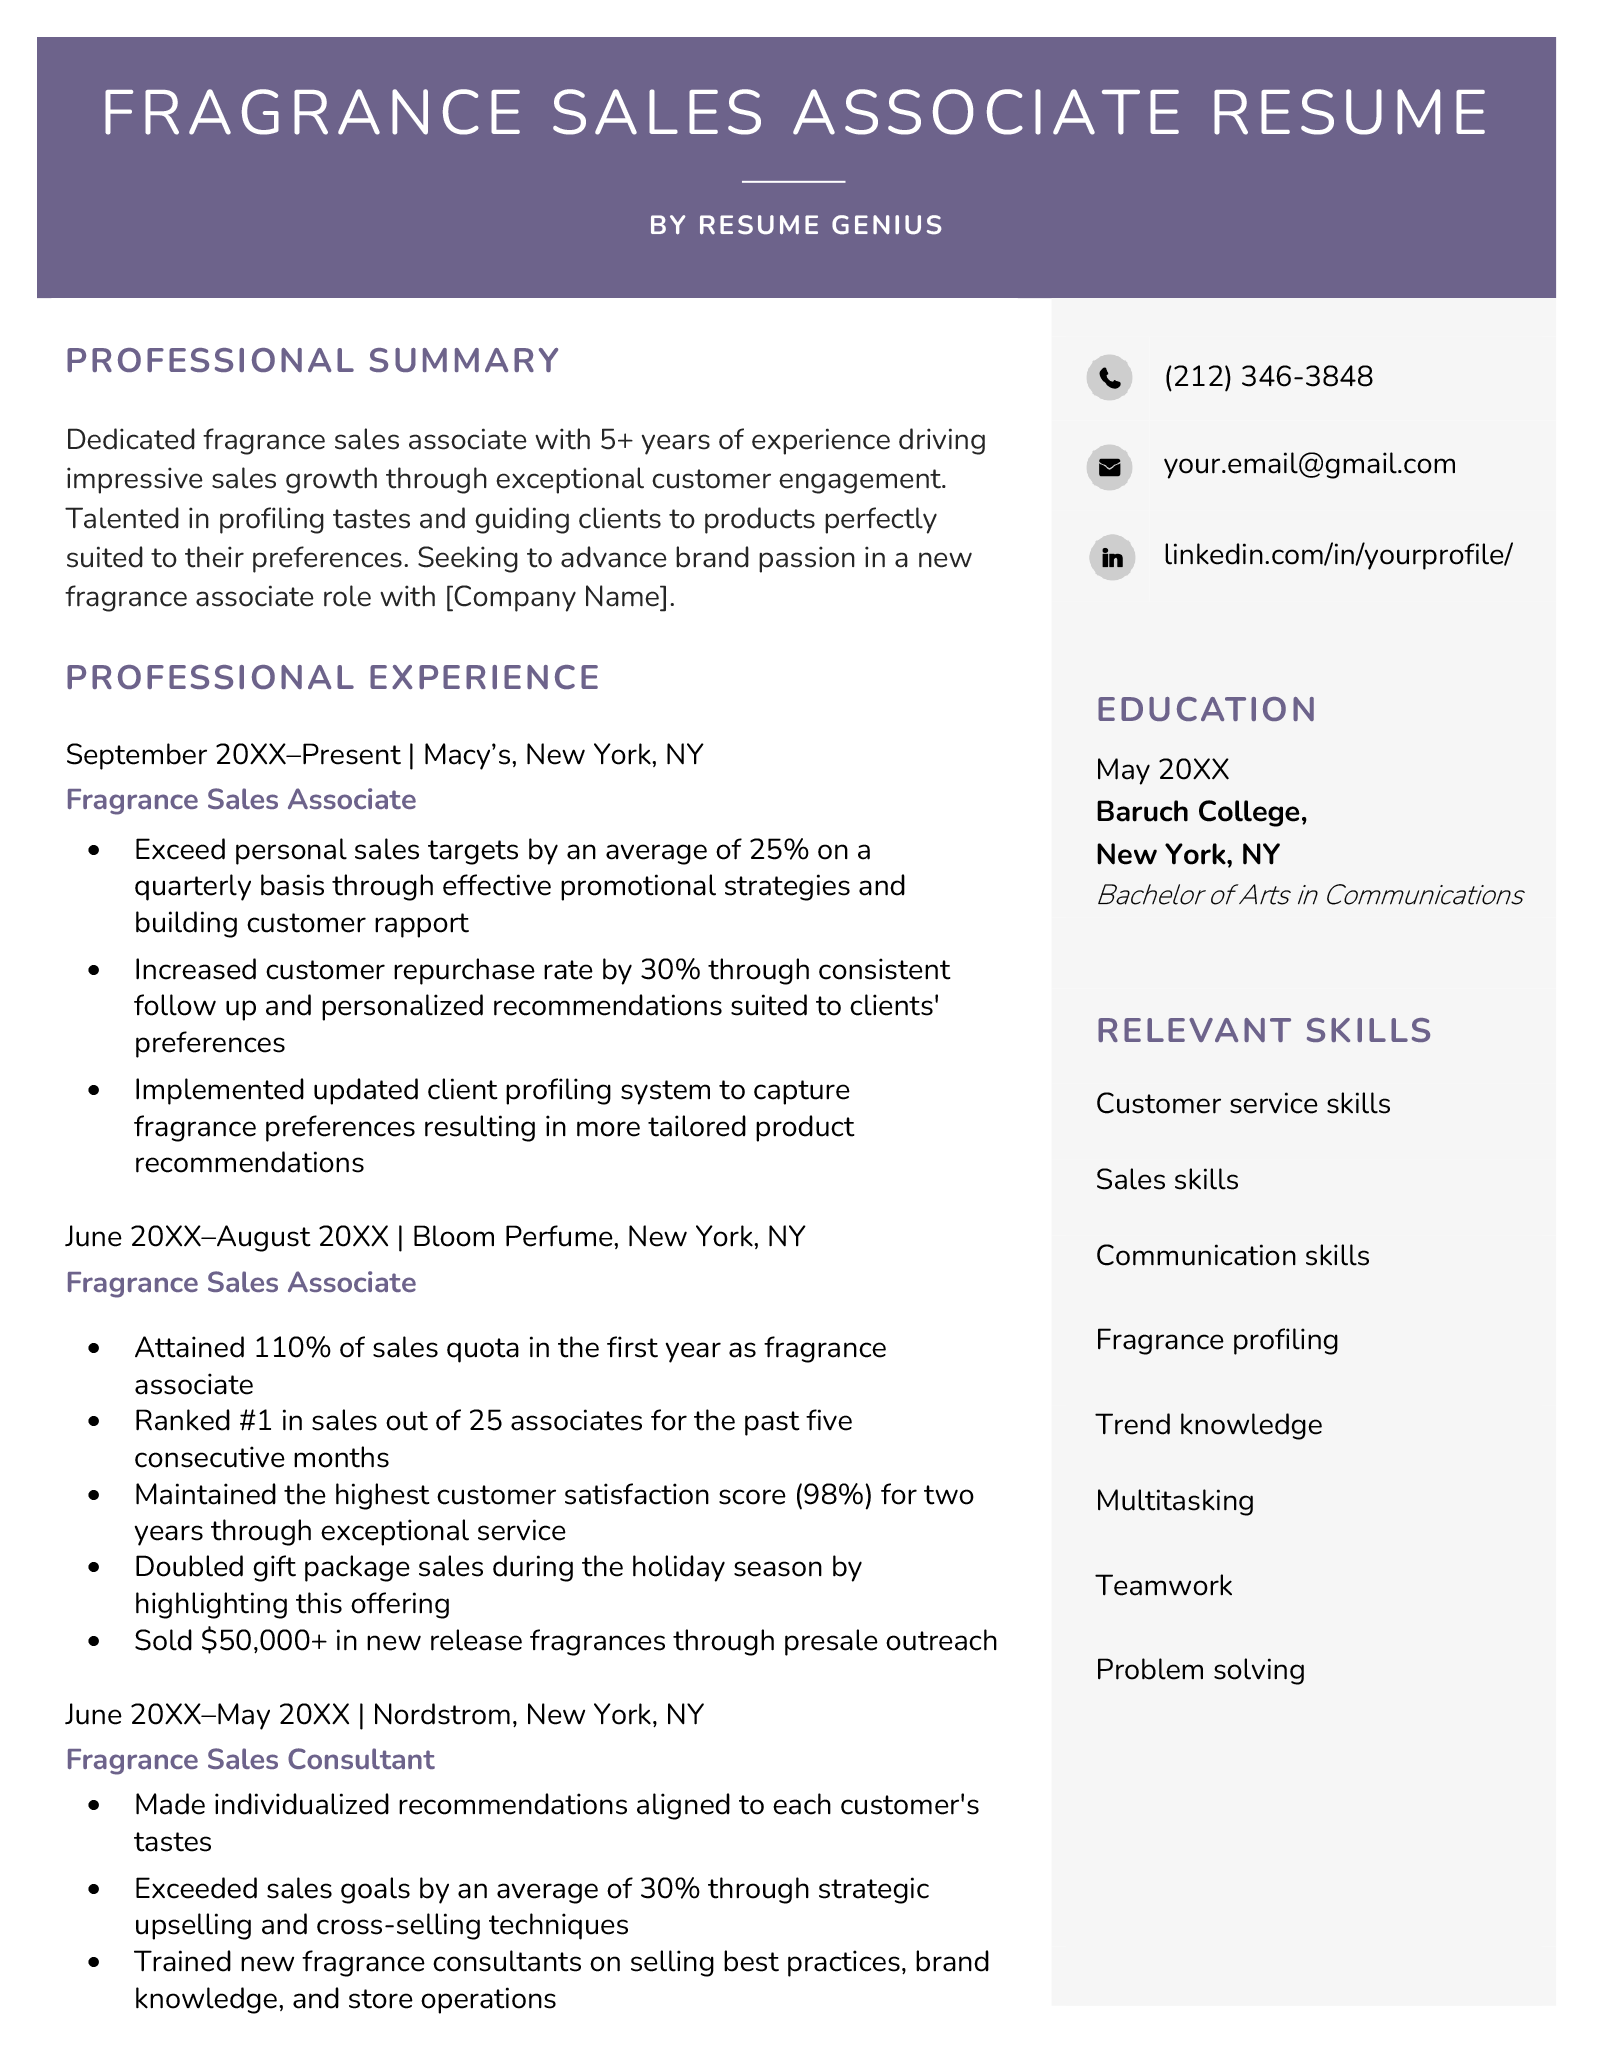 Example template for a fragrance sales associate resume.